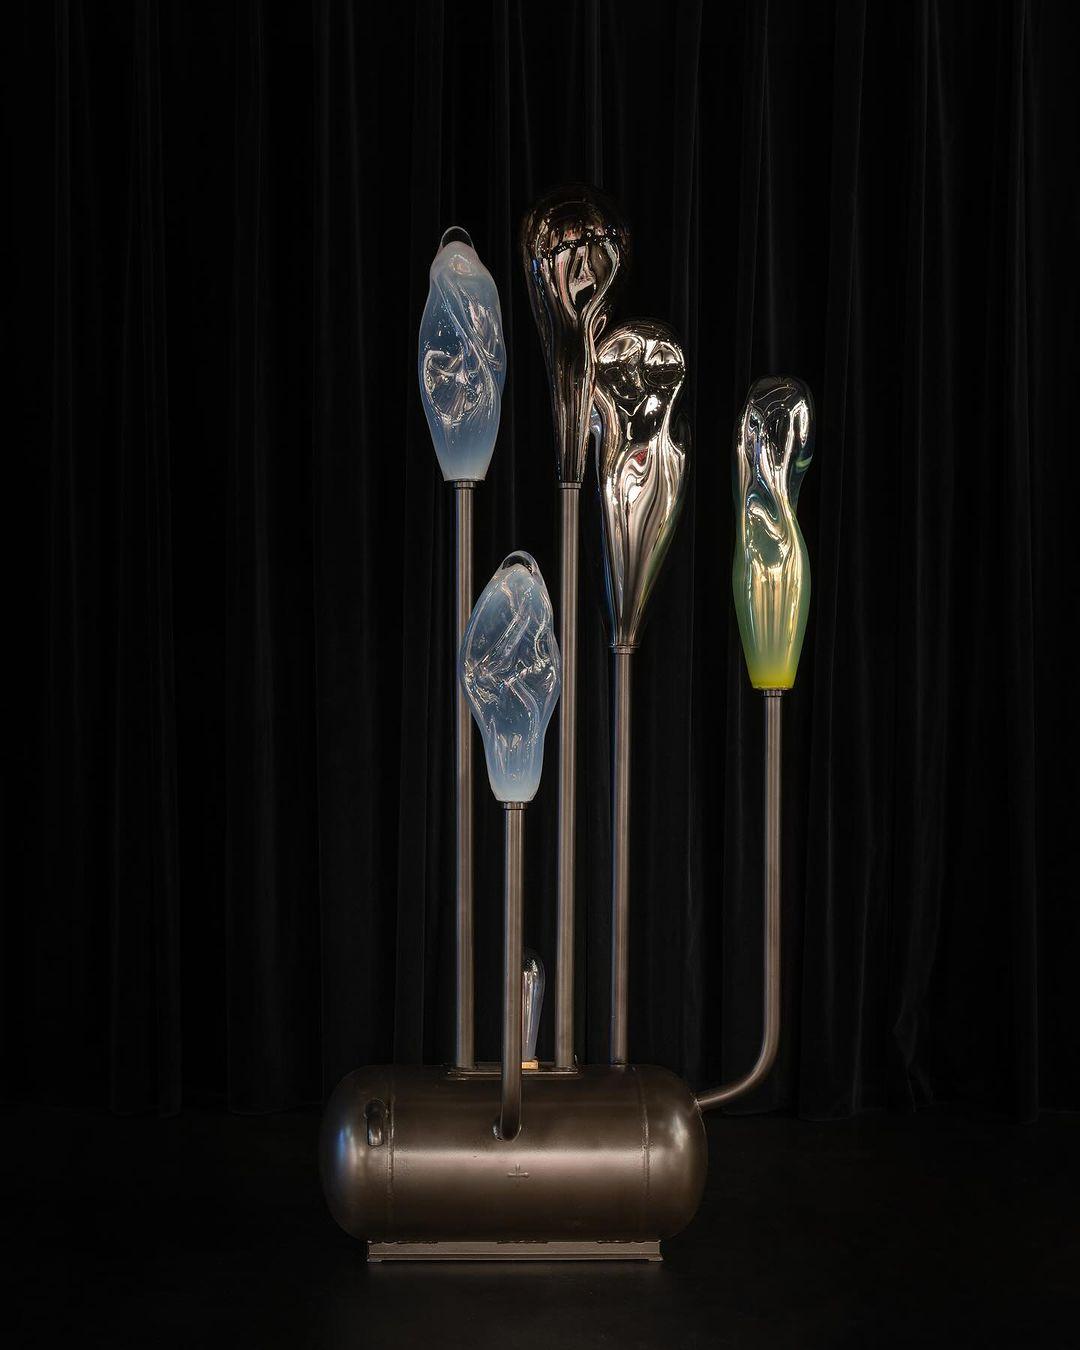 Love Factory 2 Sculpture by Mark Sturkenboom
Dimensions: W 70 x D 50 x H 180 cm
Material: Mouth Blown Glass, Silvered Glass.


Mark Sturkenboom (Driebergen, 1983) is an artist that graduated with honors in 2012 at Artez Academy for the Arts in